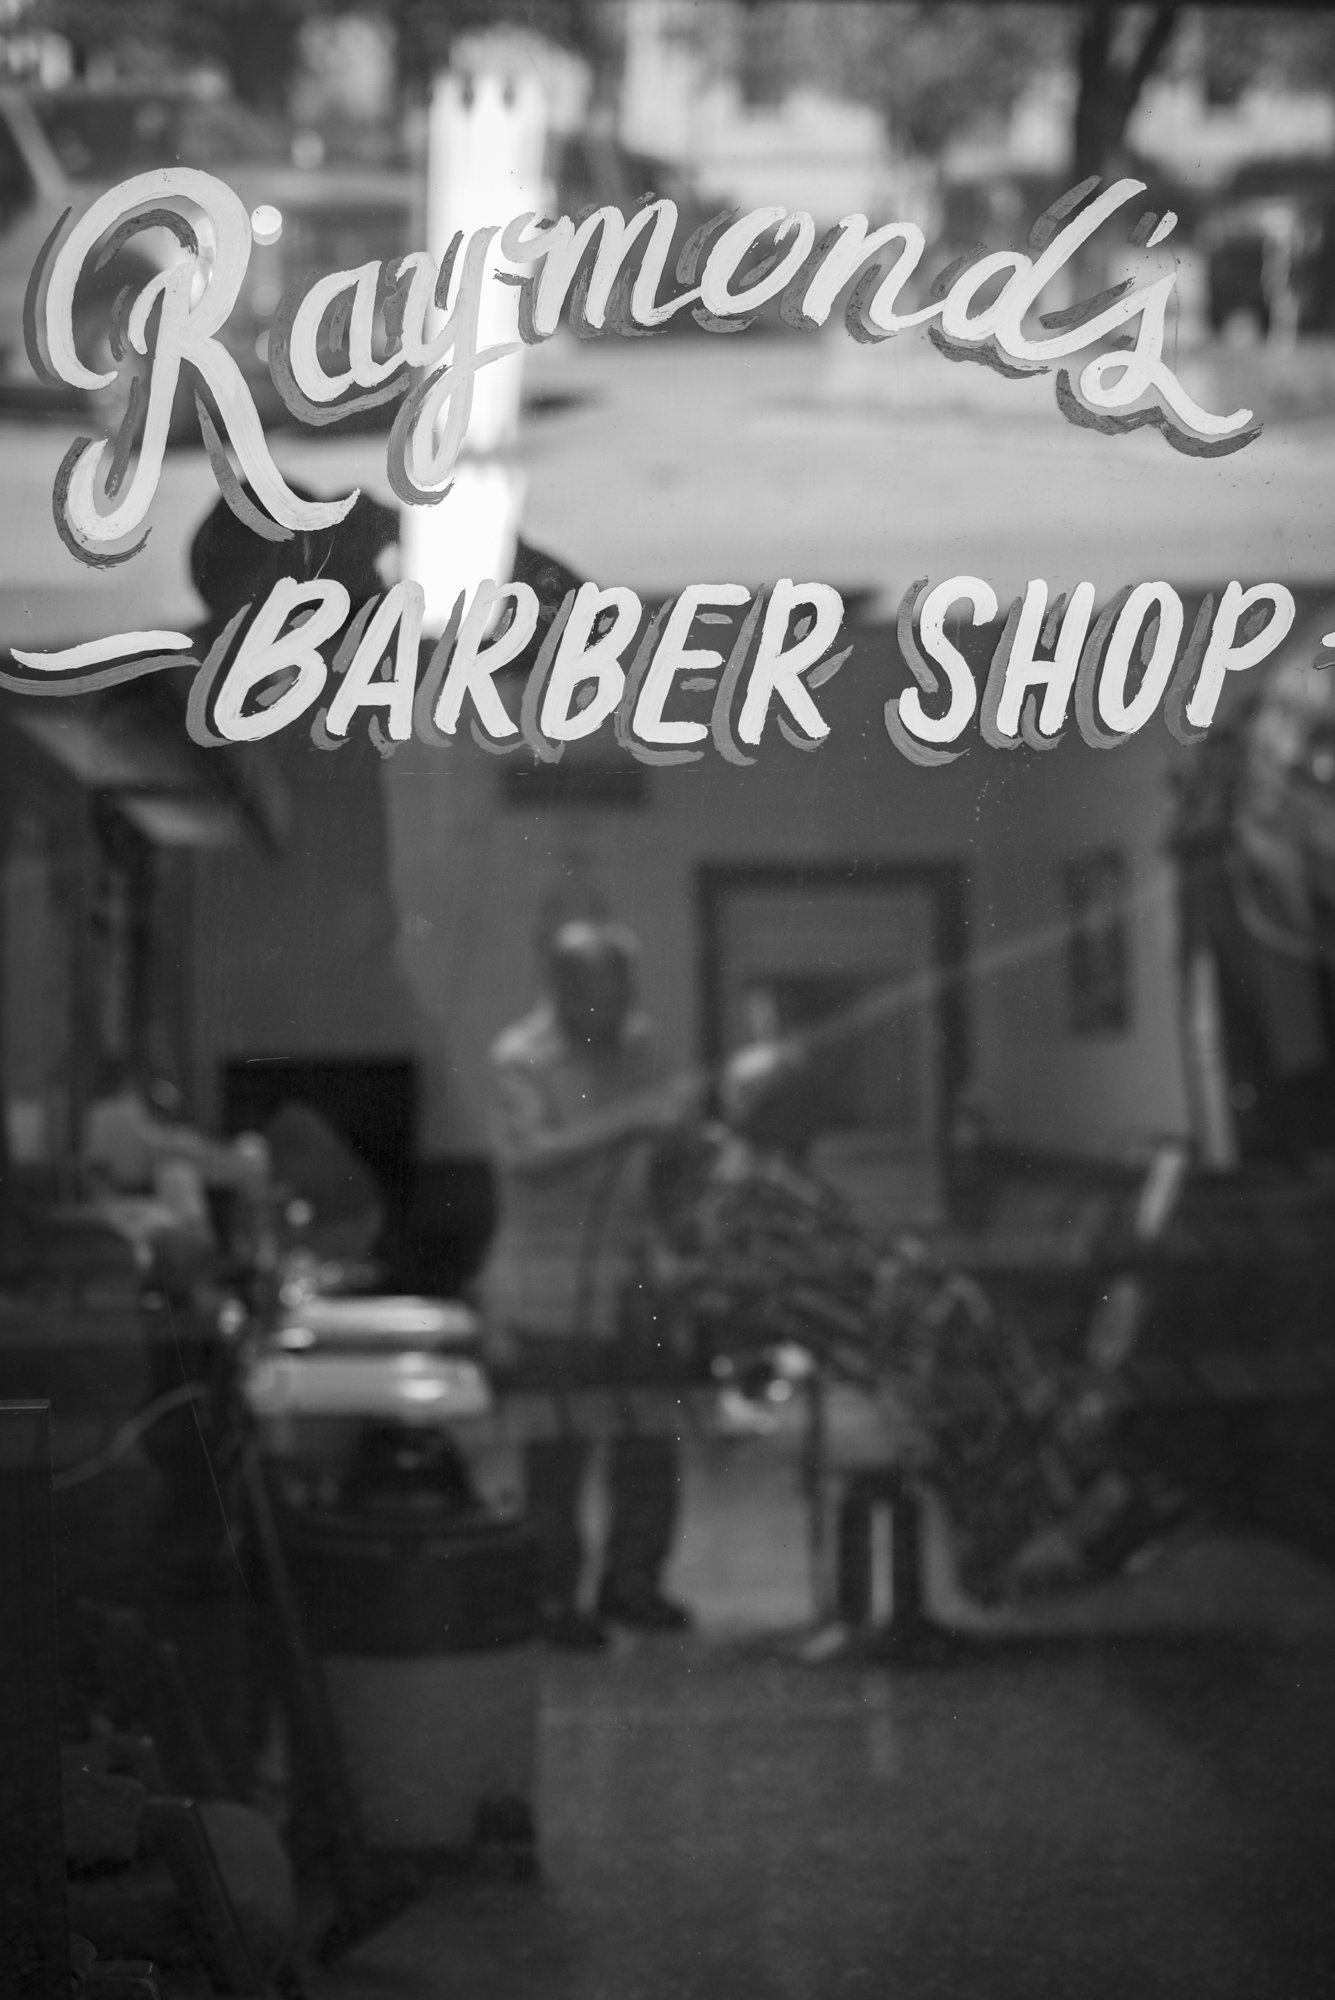 Albany's Barber Shop Since 1930 - Patsy's Barber Shop